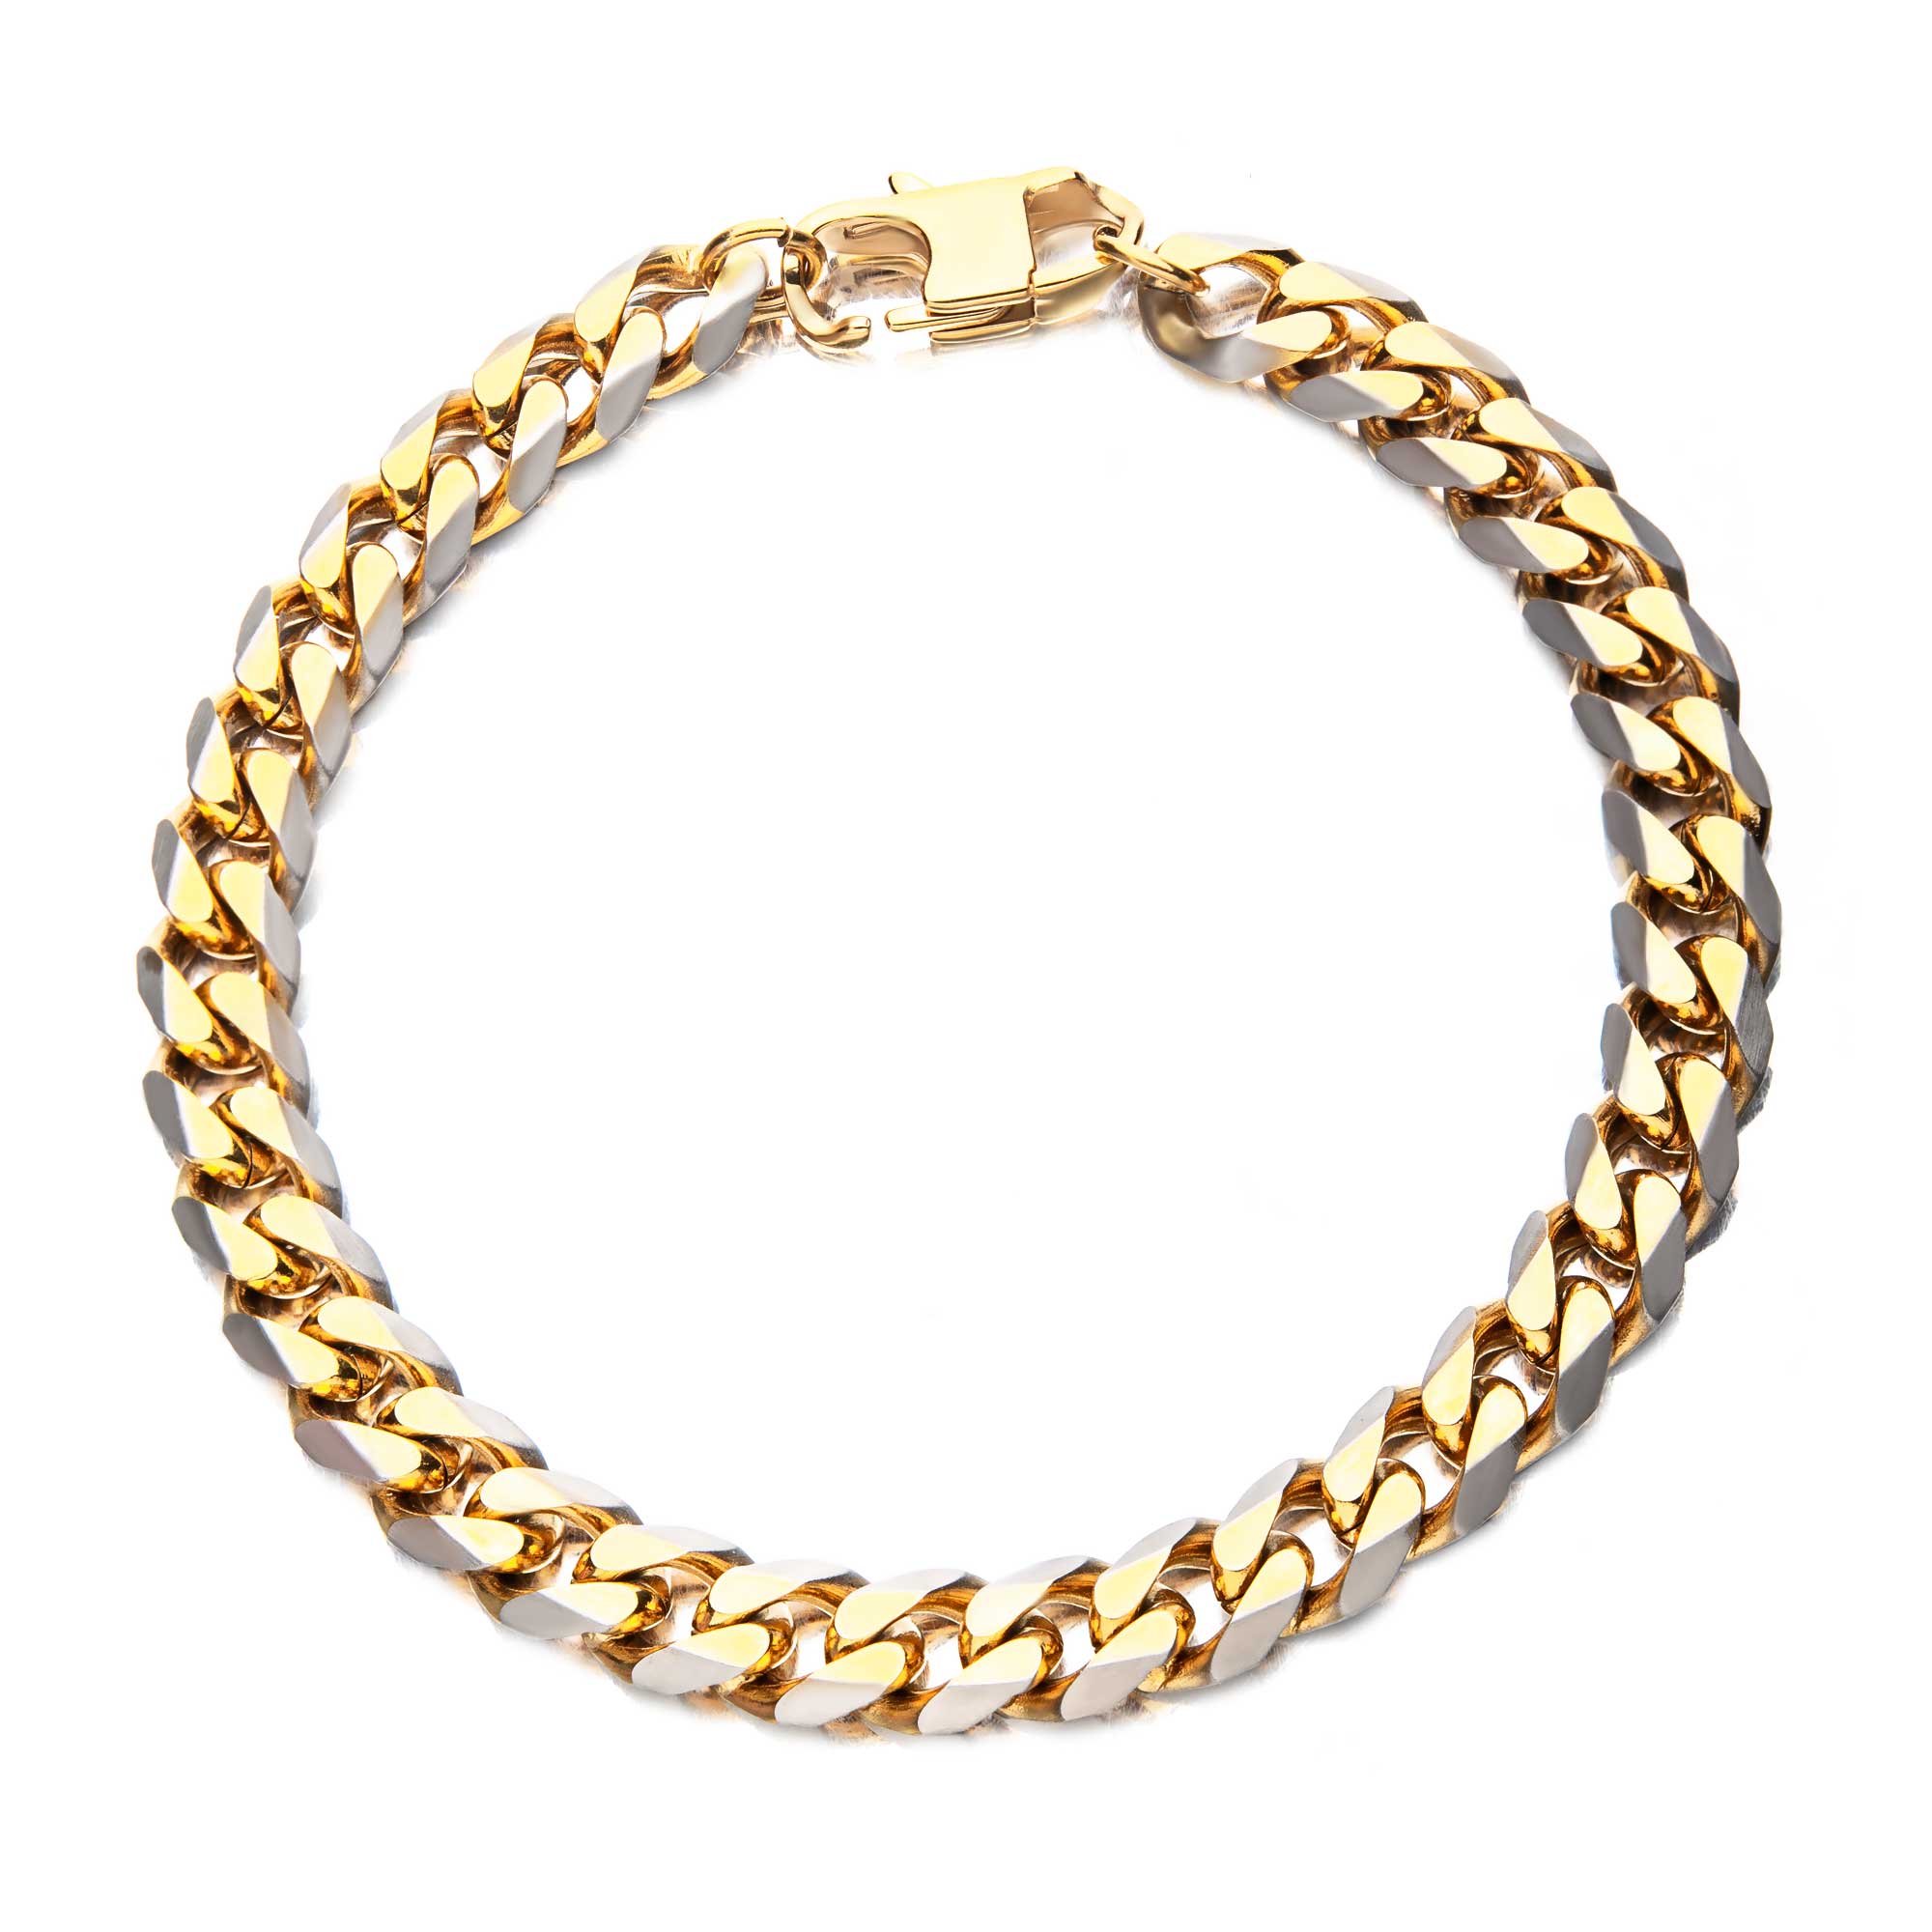 Stainless Steel Gold Plated 8mm Curb Chain with Lobster Clasp Image 2 Lewis Jewelers, Inc. Ansonia, CT